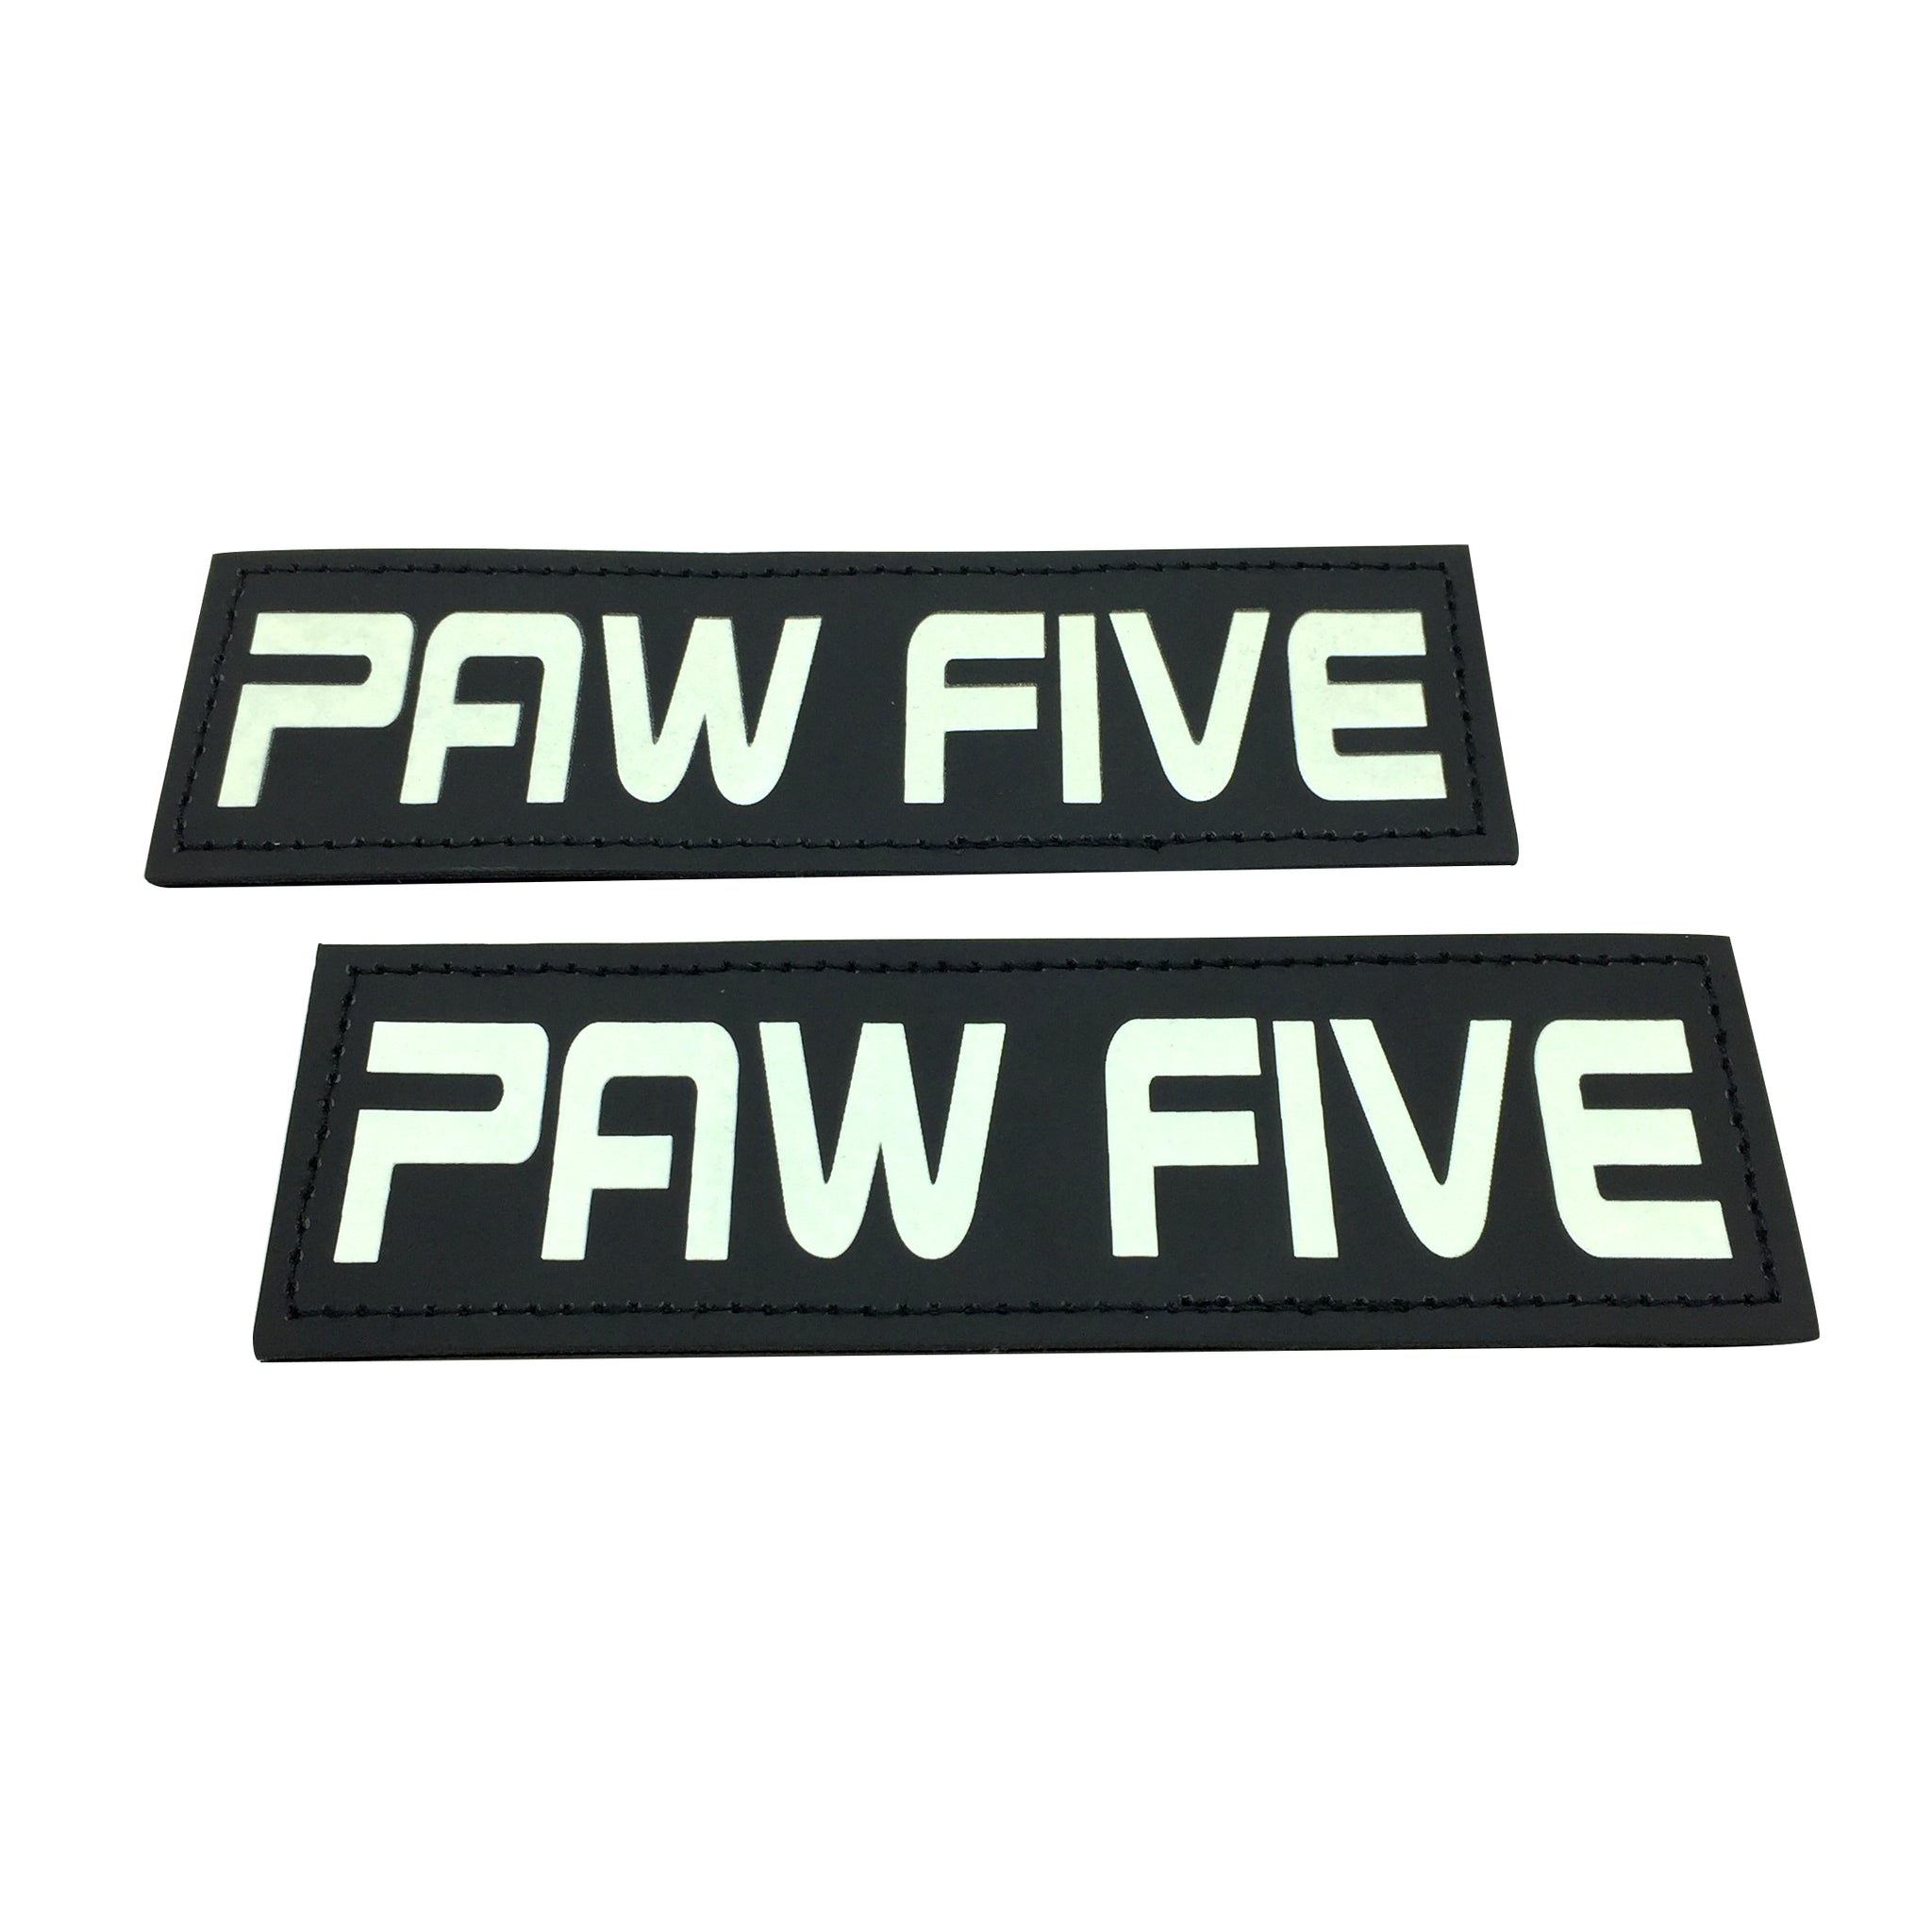 ASK TO PET Velcro Patch (Glow in the Dark) - Paw Five